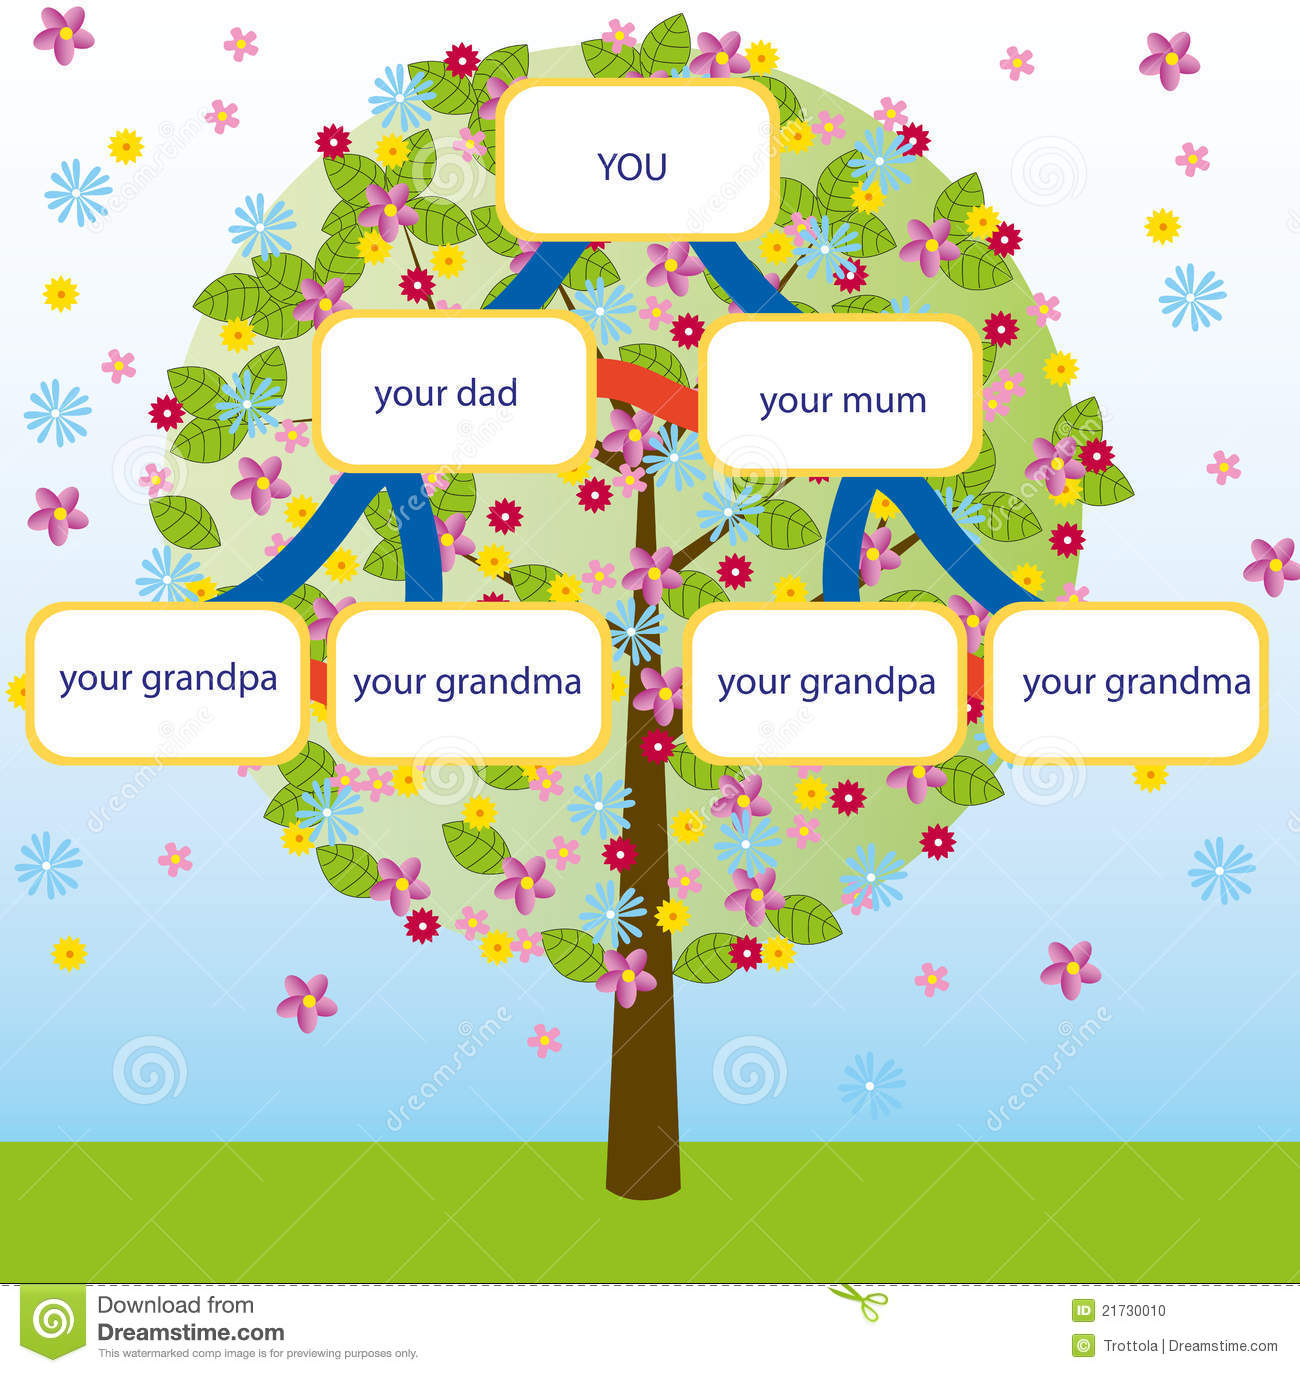 Illustration Of A Family Tree  Genealogic Scheme With A Spring Tree